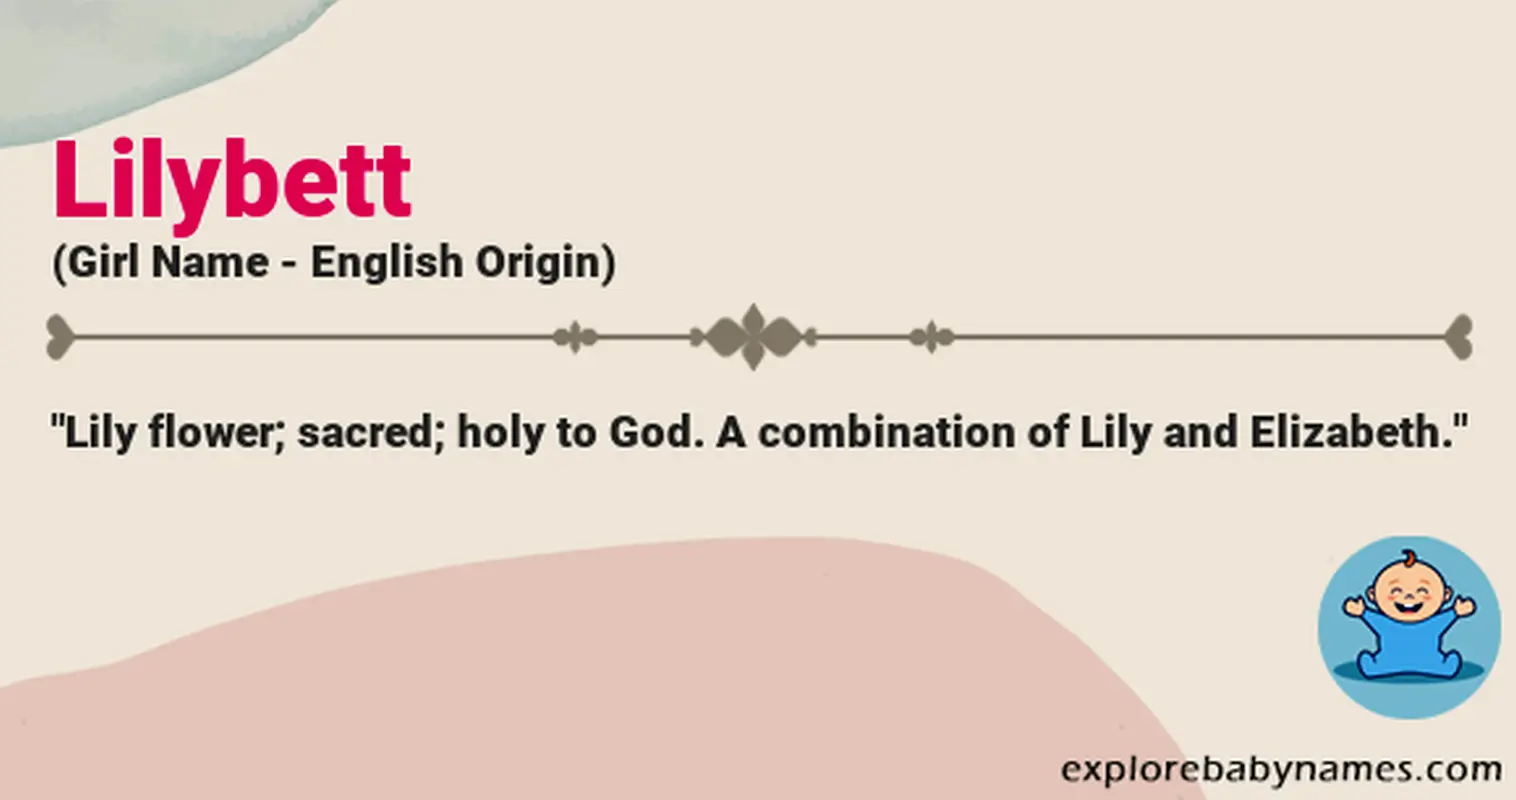 Meaning of Lilybett